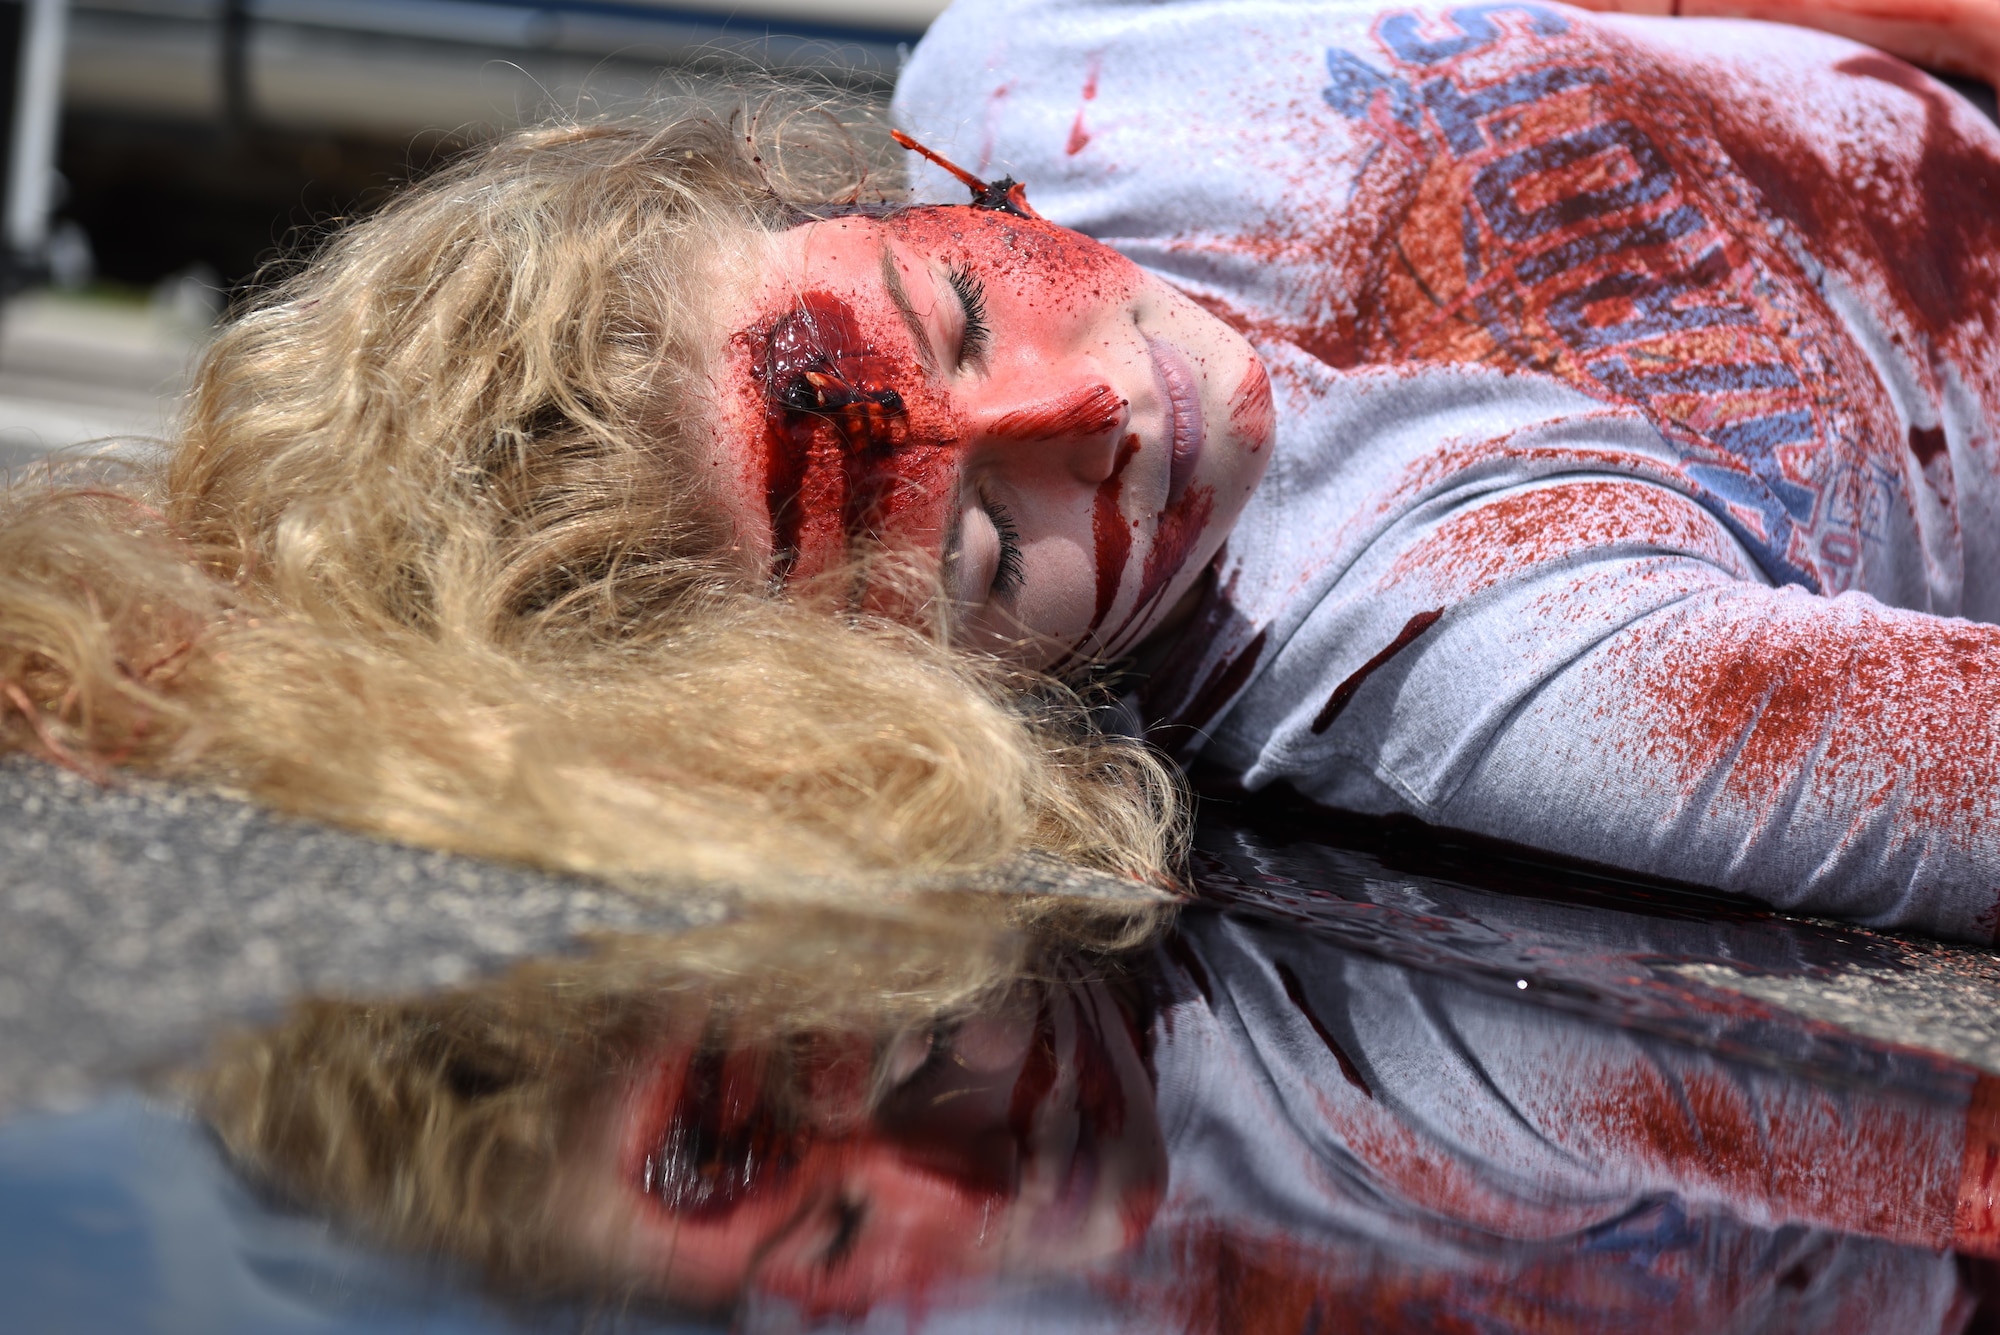 A student performer plays dead as a result of a drunk driving car crash during Freshman Impact at Douglas High School, Box Elder S.D., May 9, 2018. This event teaches young adults the dangers of driving under the influence and distracted driving so they can make better decisions behind the wheel. (U.S.  Air Force photo by Airman 1st Class Thomas Karol)